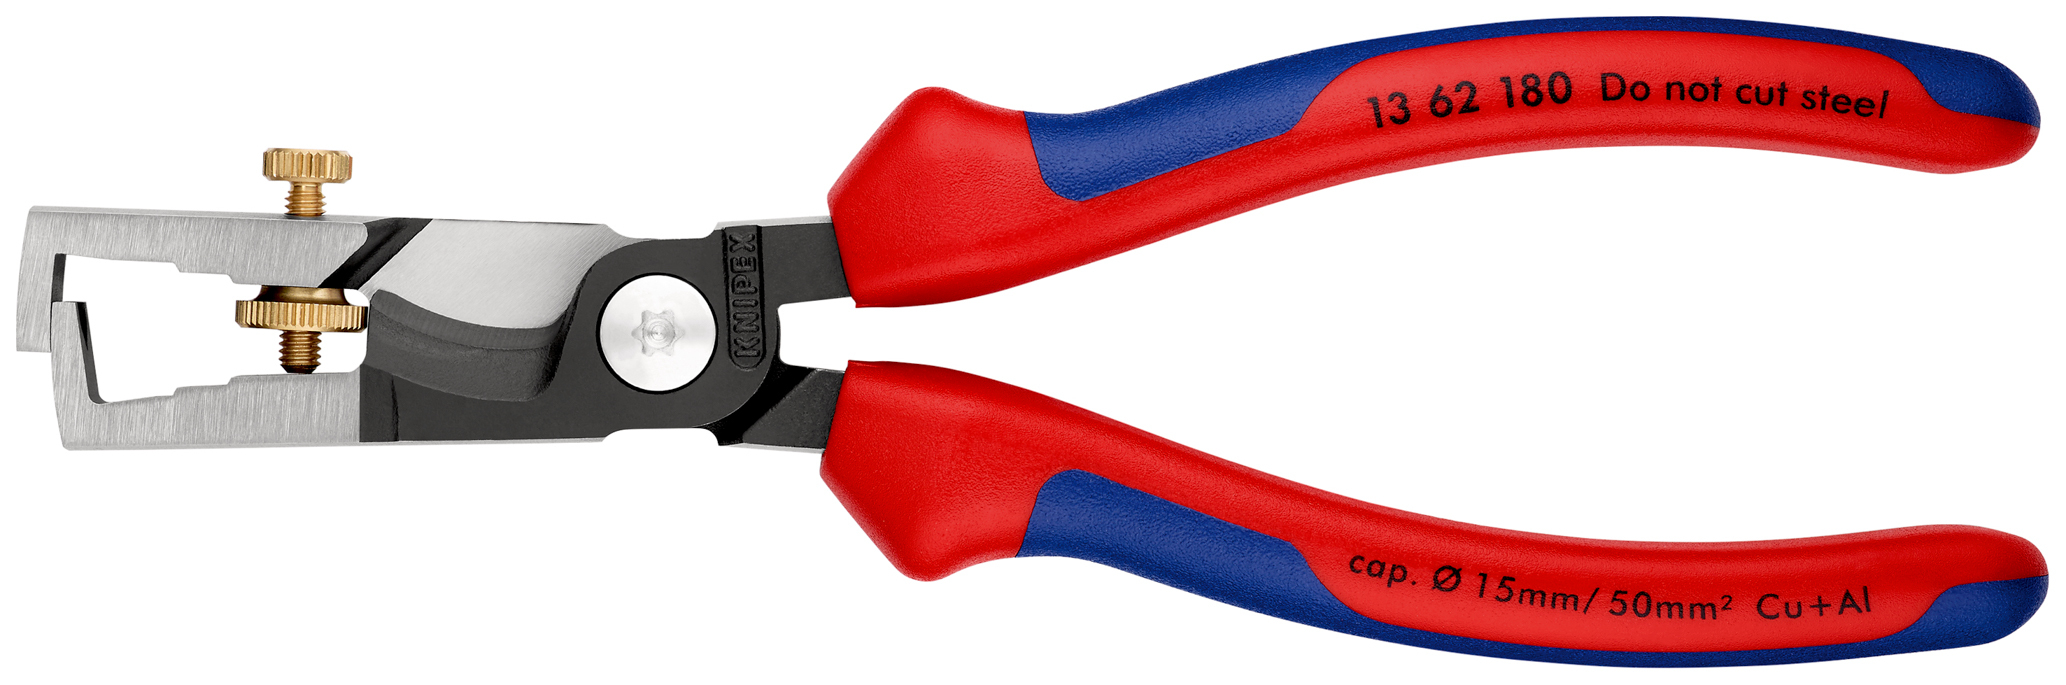 Pince a denuder/coupe cable strix KNIPEX - 13 62 180